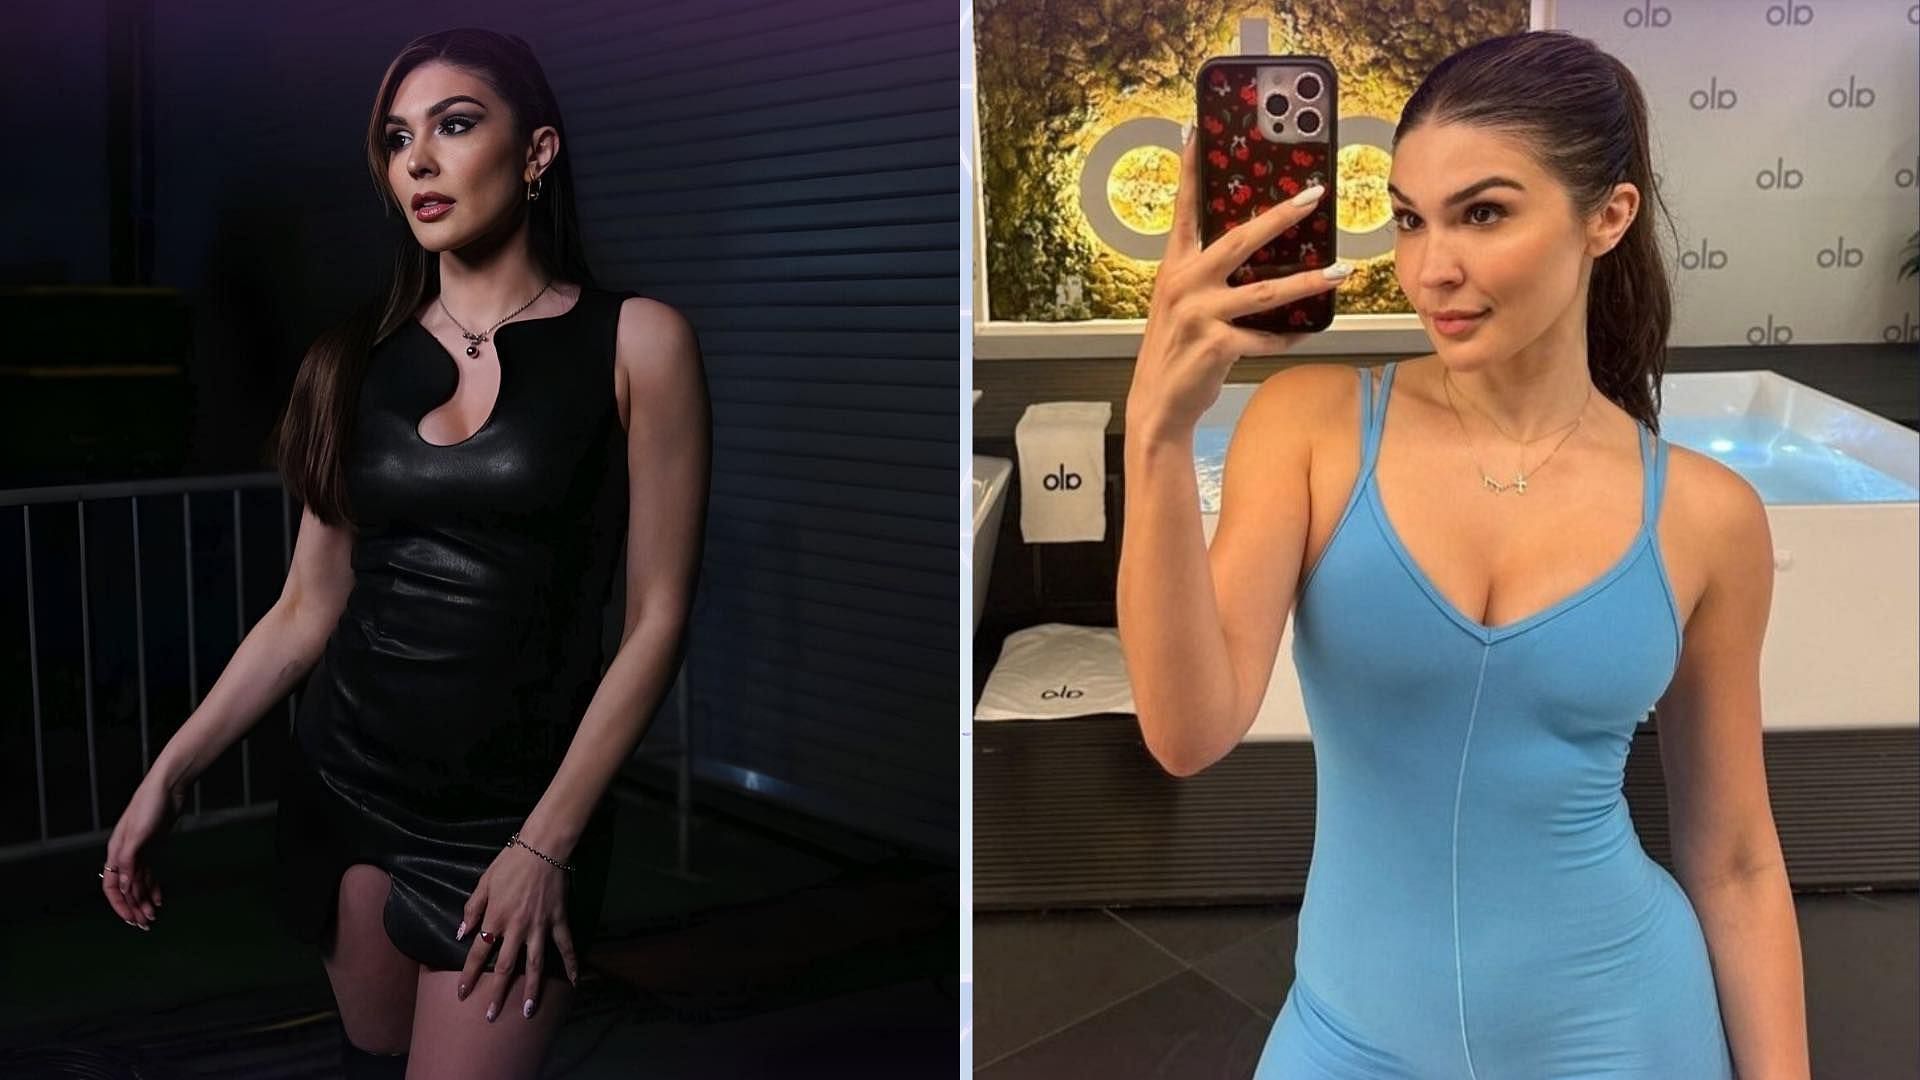 Cathy Kelly is a current back-stage interviewer for WWE